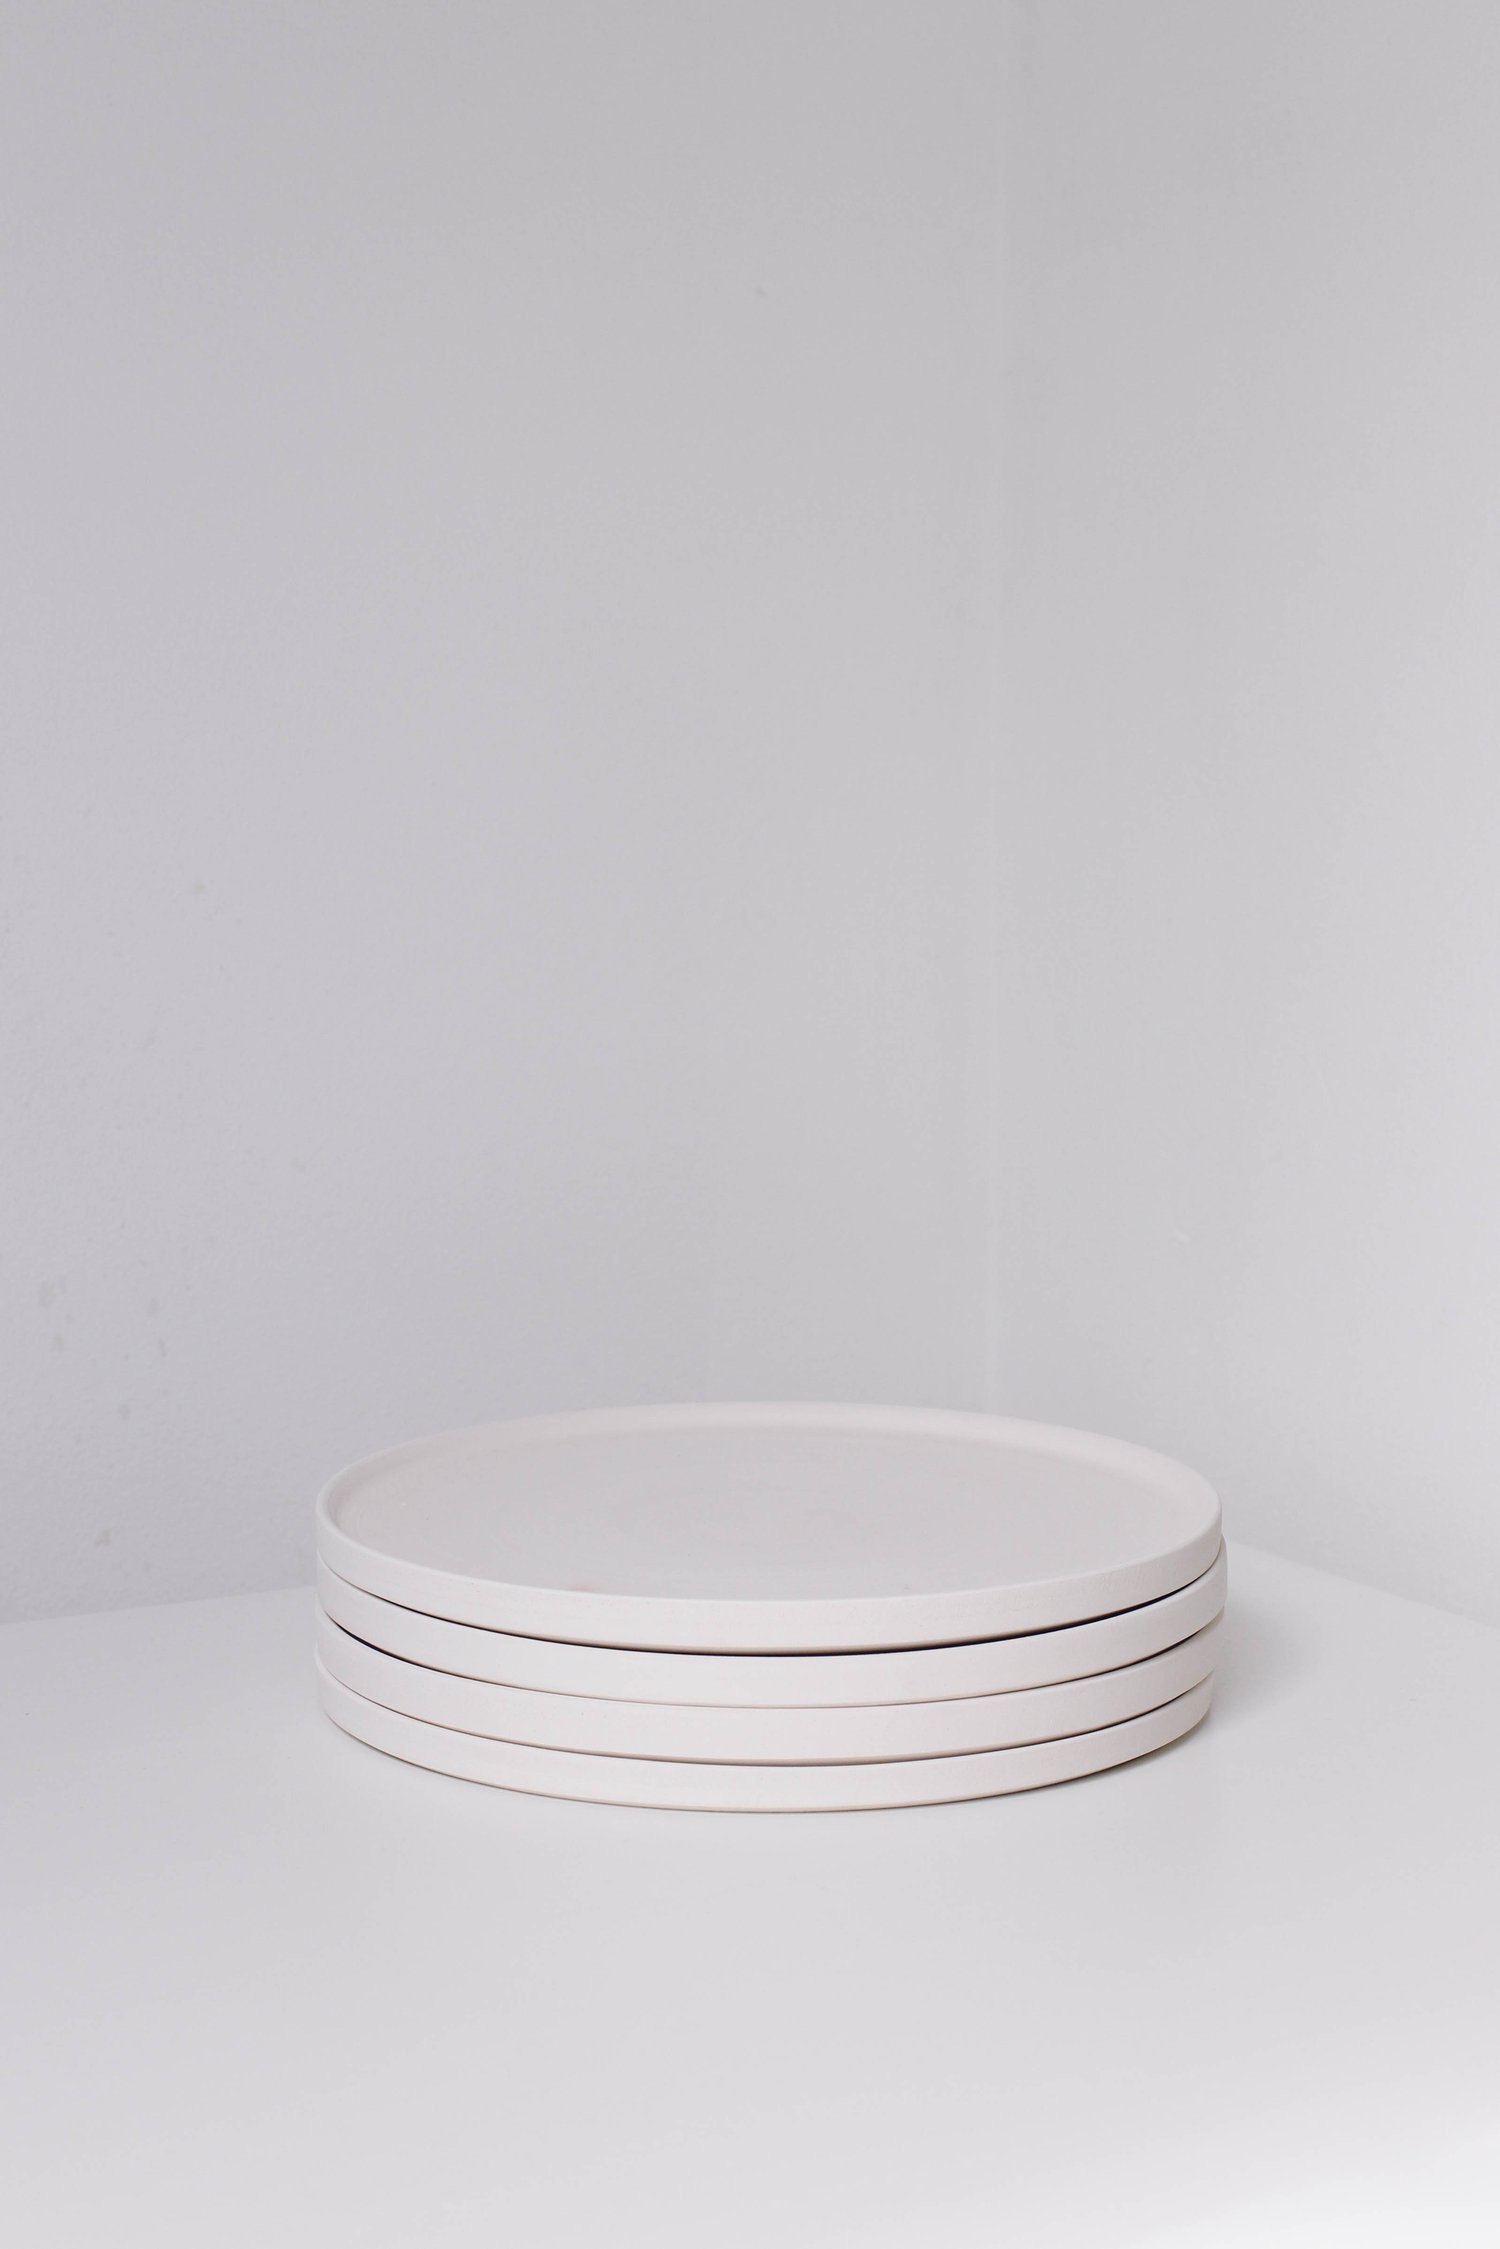 Image of Plate Pre-Order